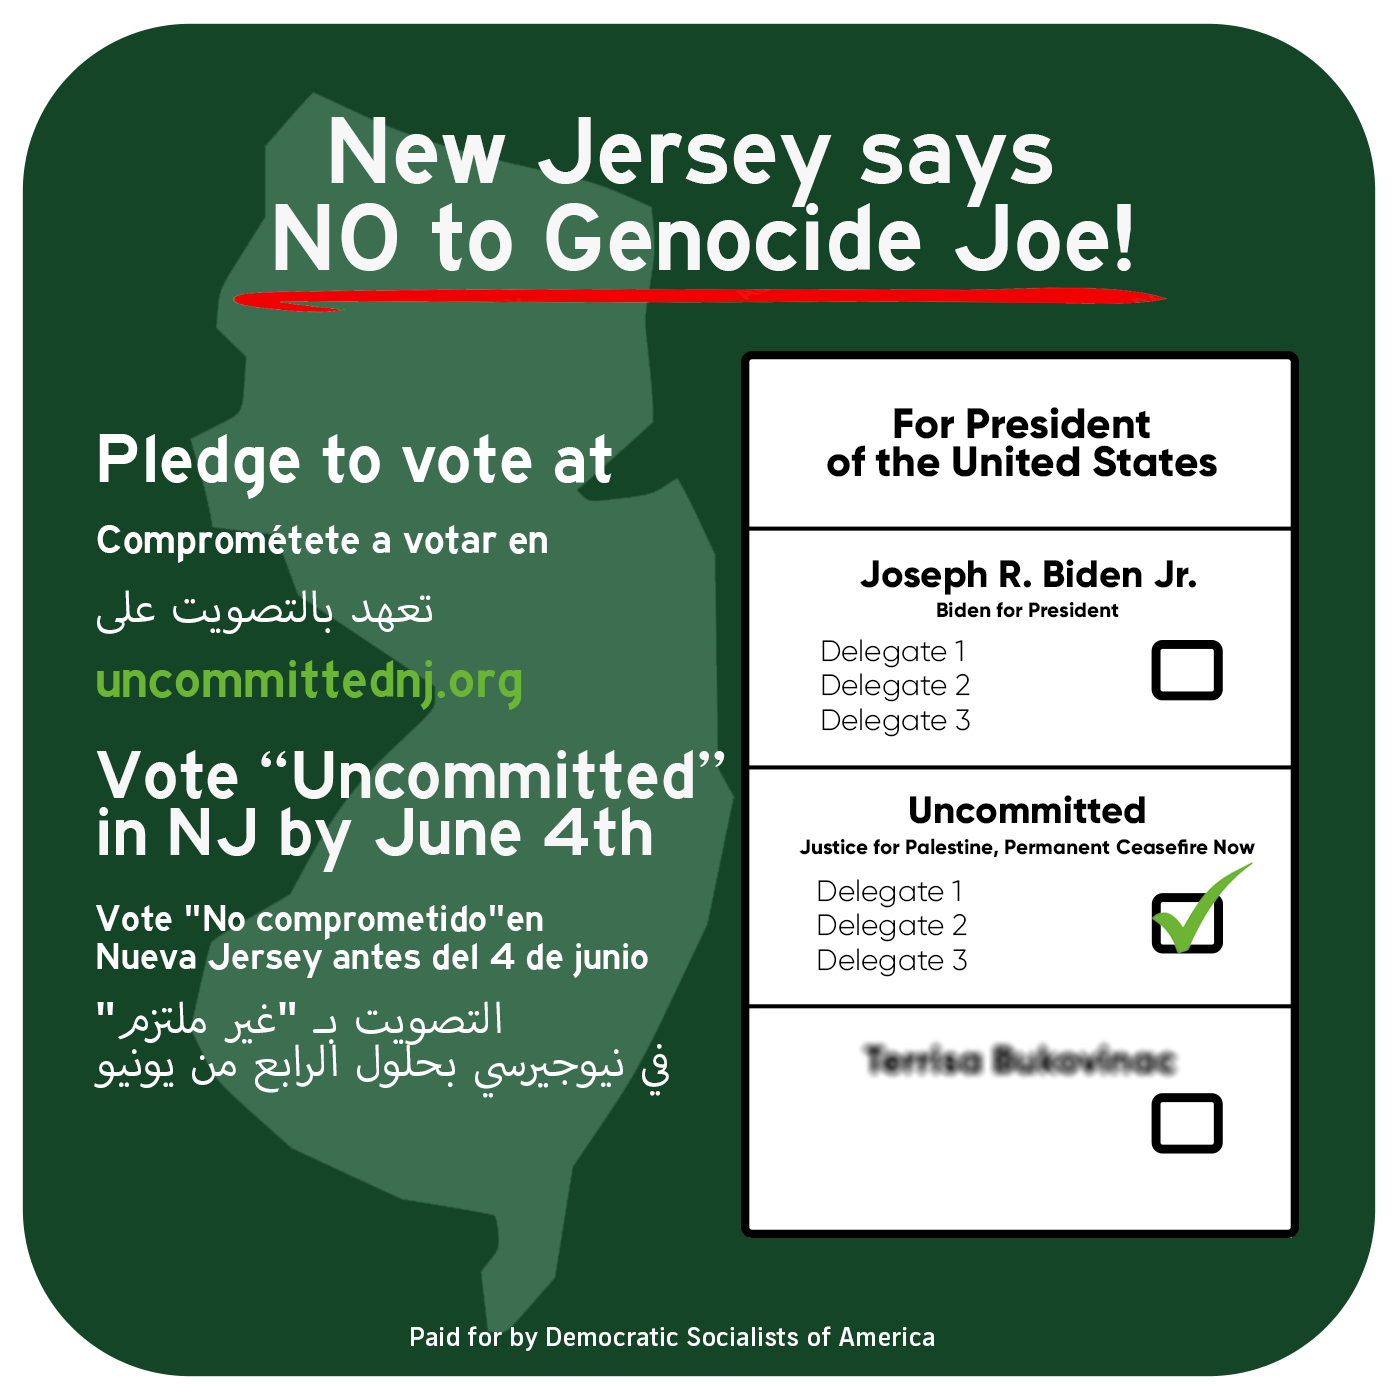 Sample
ballot that is titled 'New Jersey says NO to Genocide Joe!'. Below the title it
says 'Pledge to vote at uncommittednj.org' and 'Vote Uncommitted in NJ by June
4th' in English, Spanish, and Arabic. There is a graphic display of the ballot
that says 'For President of the United States' with Joseph R. Biden Jr with the
slogan 'Biden for President' and Uncommitted with the slogan 'Justice for
Palestine, Permanent Ceasefire Now'. The Uncommitted choice has a green check
next to it